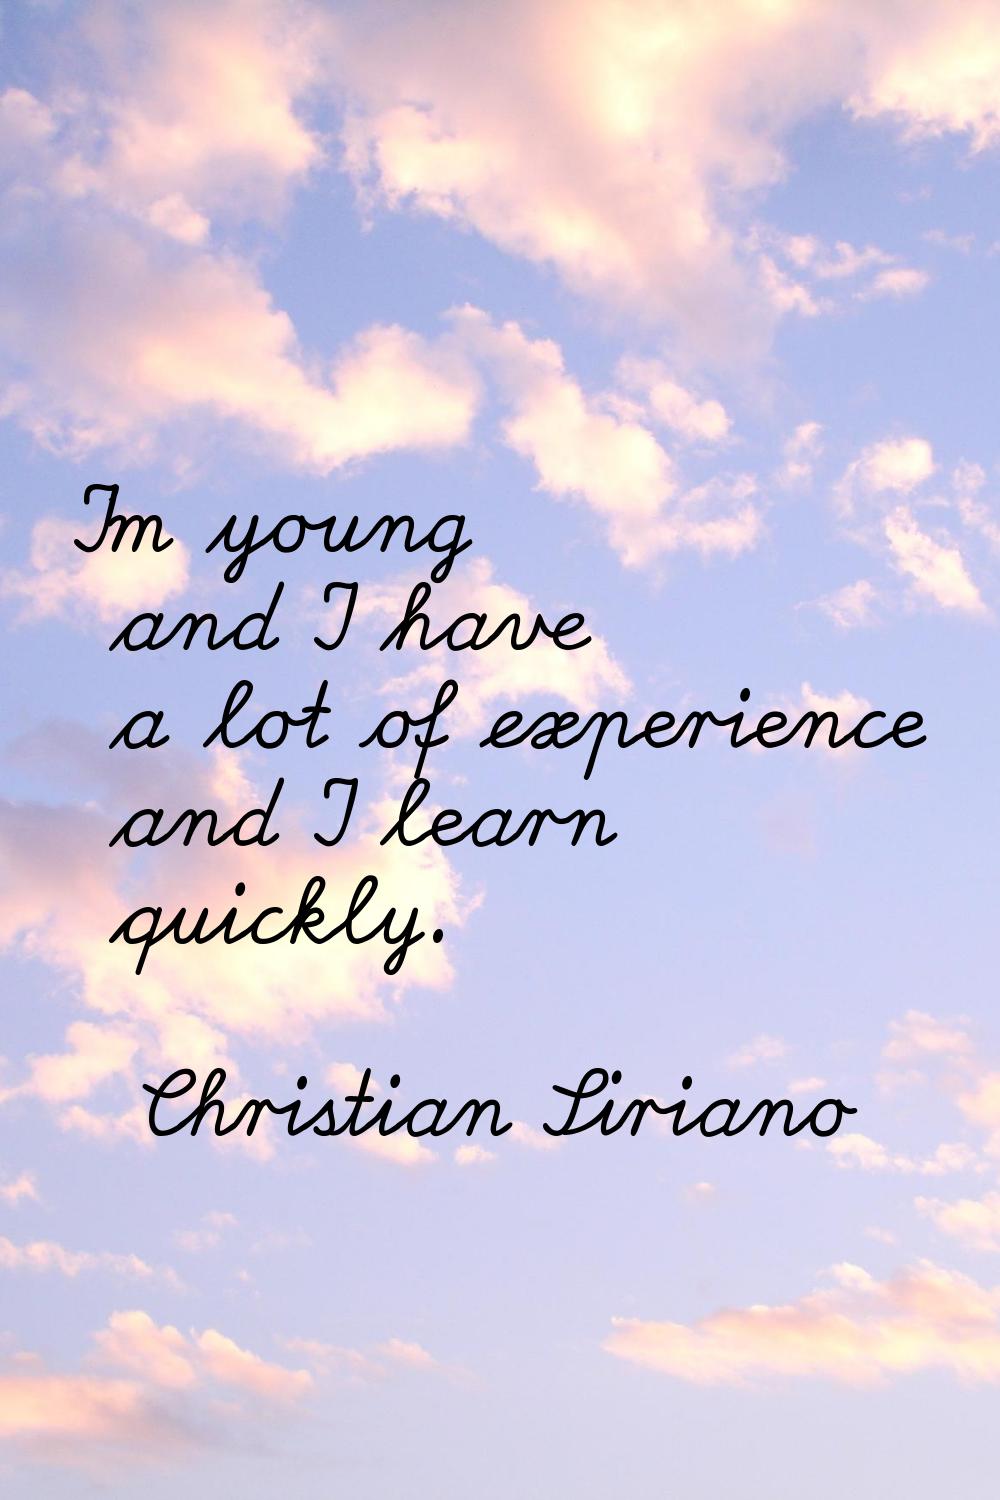 I'm young and I have a lot of experience and I learn quickly.